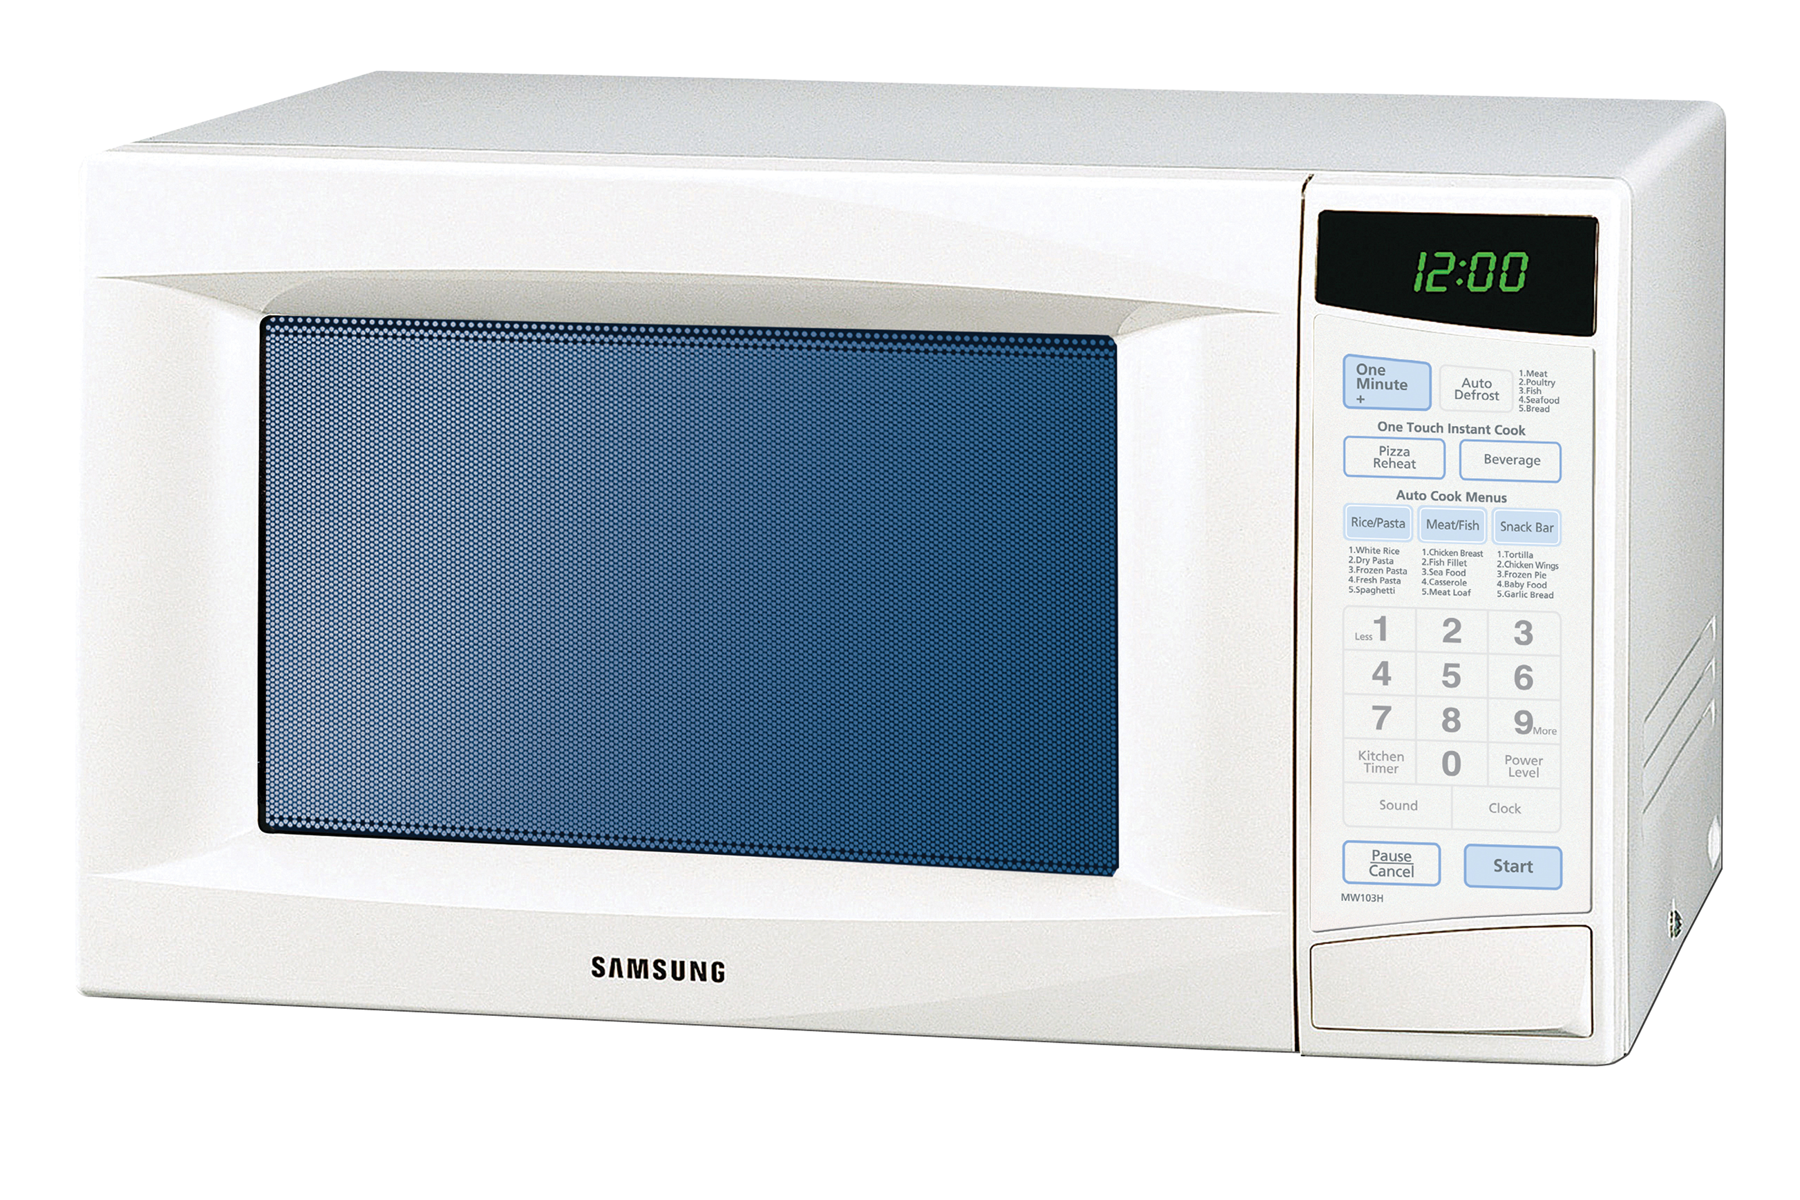 Samsung Microwave Oven Manual PdfBestMicrowave